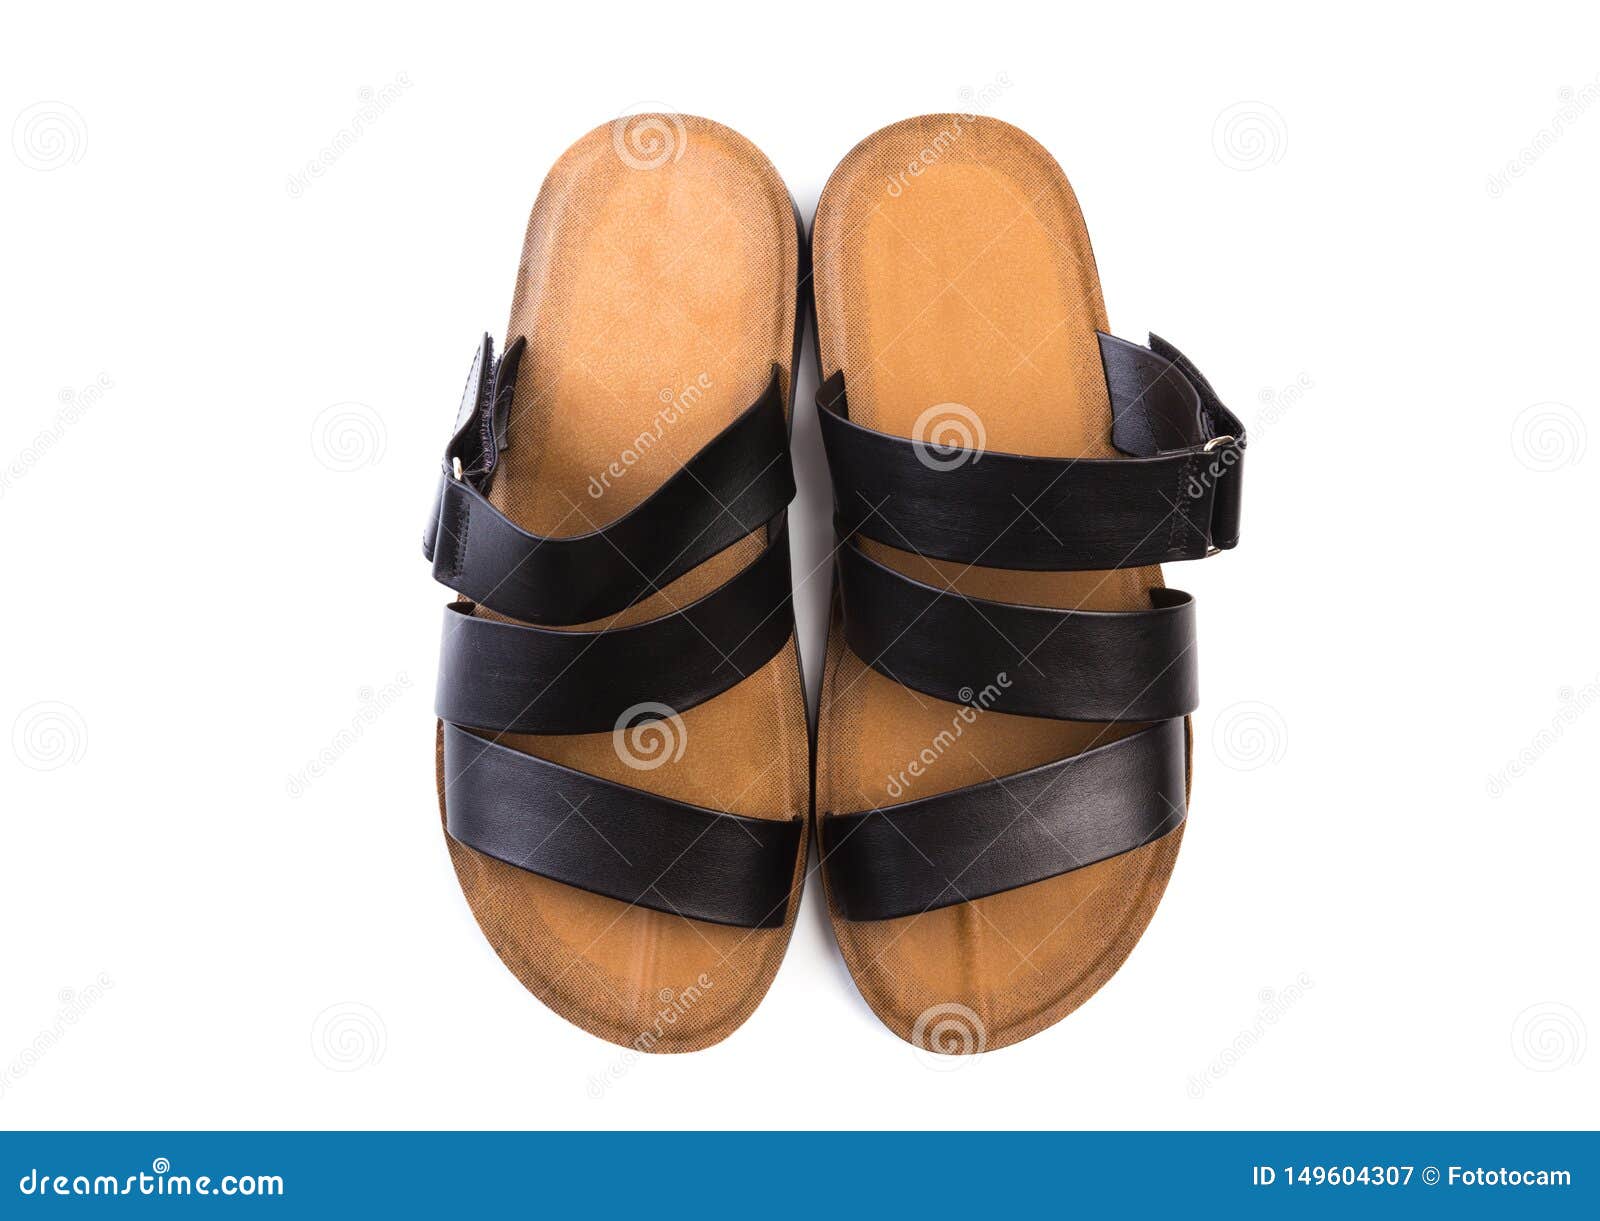 Mens Summer Leather Sandals Isolated on White Background Stock Image ...